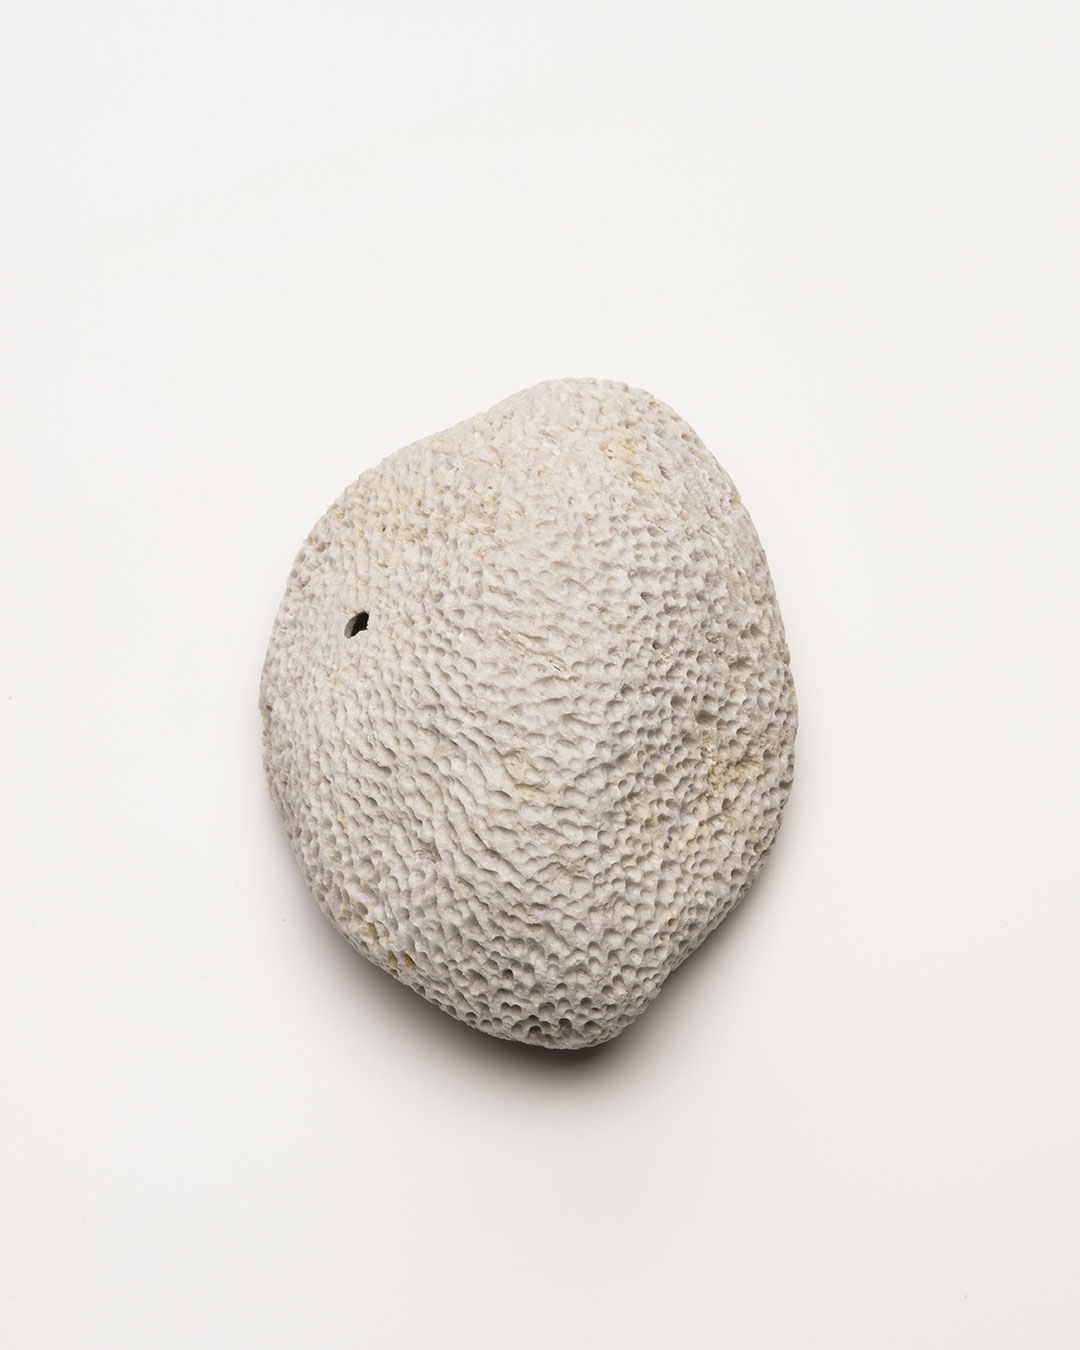 Vivi Touloumidi, What Will the Cosmos Say? 2013, brooch, pumice stone, steel, 100 x 70 x 50 mm, €280 (image: front)